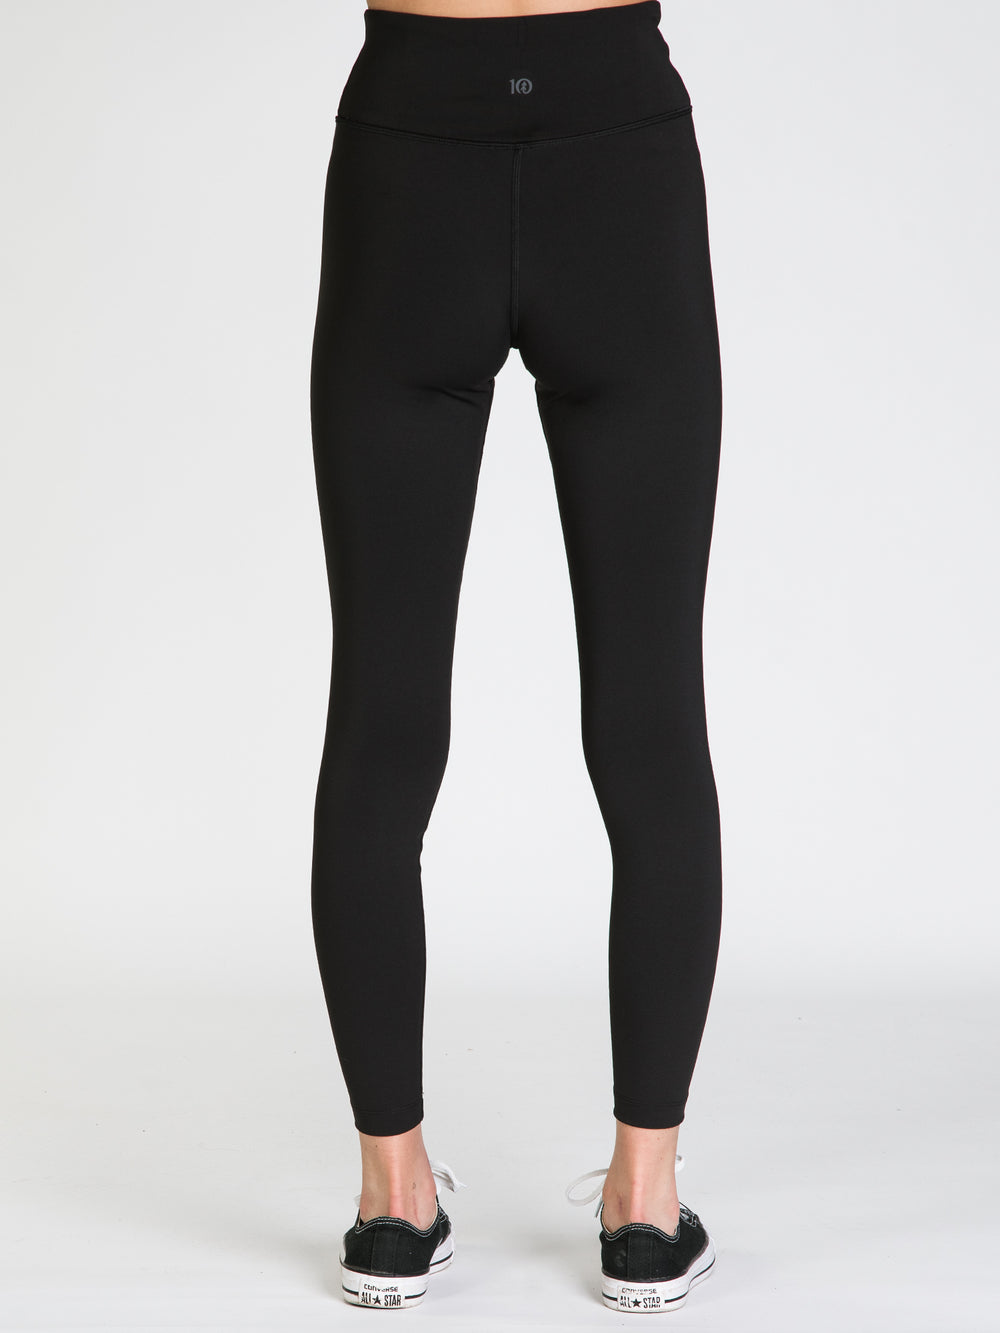 TENTREE IN MOTION HIGH-RISE LEGGING  - CLEARANCE